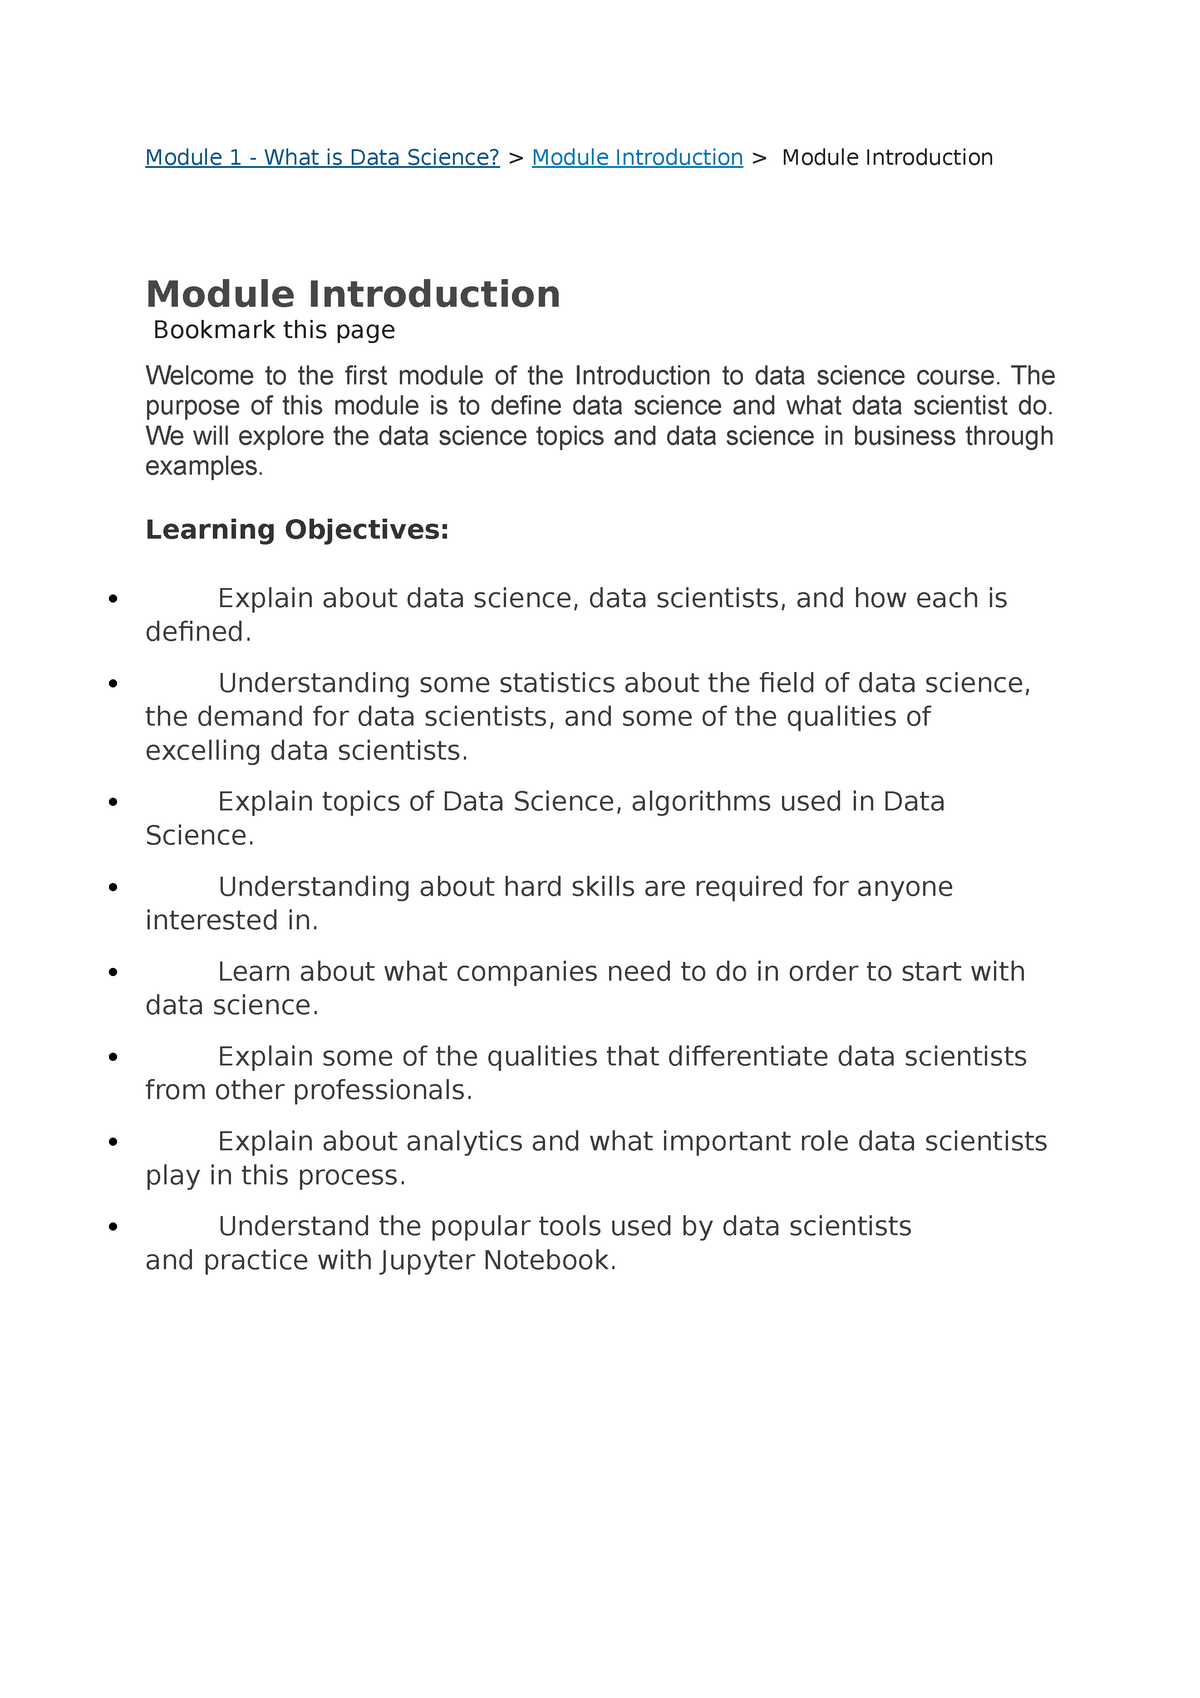 essay about data science